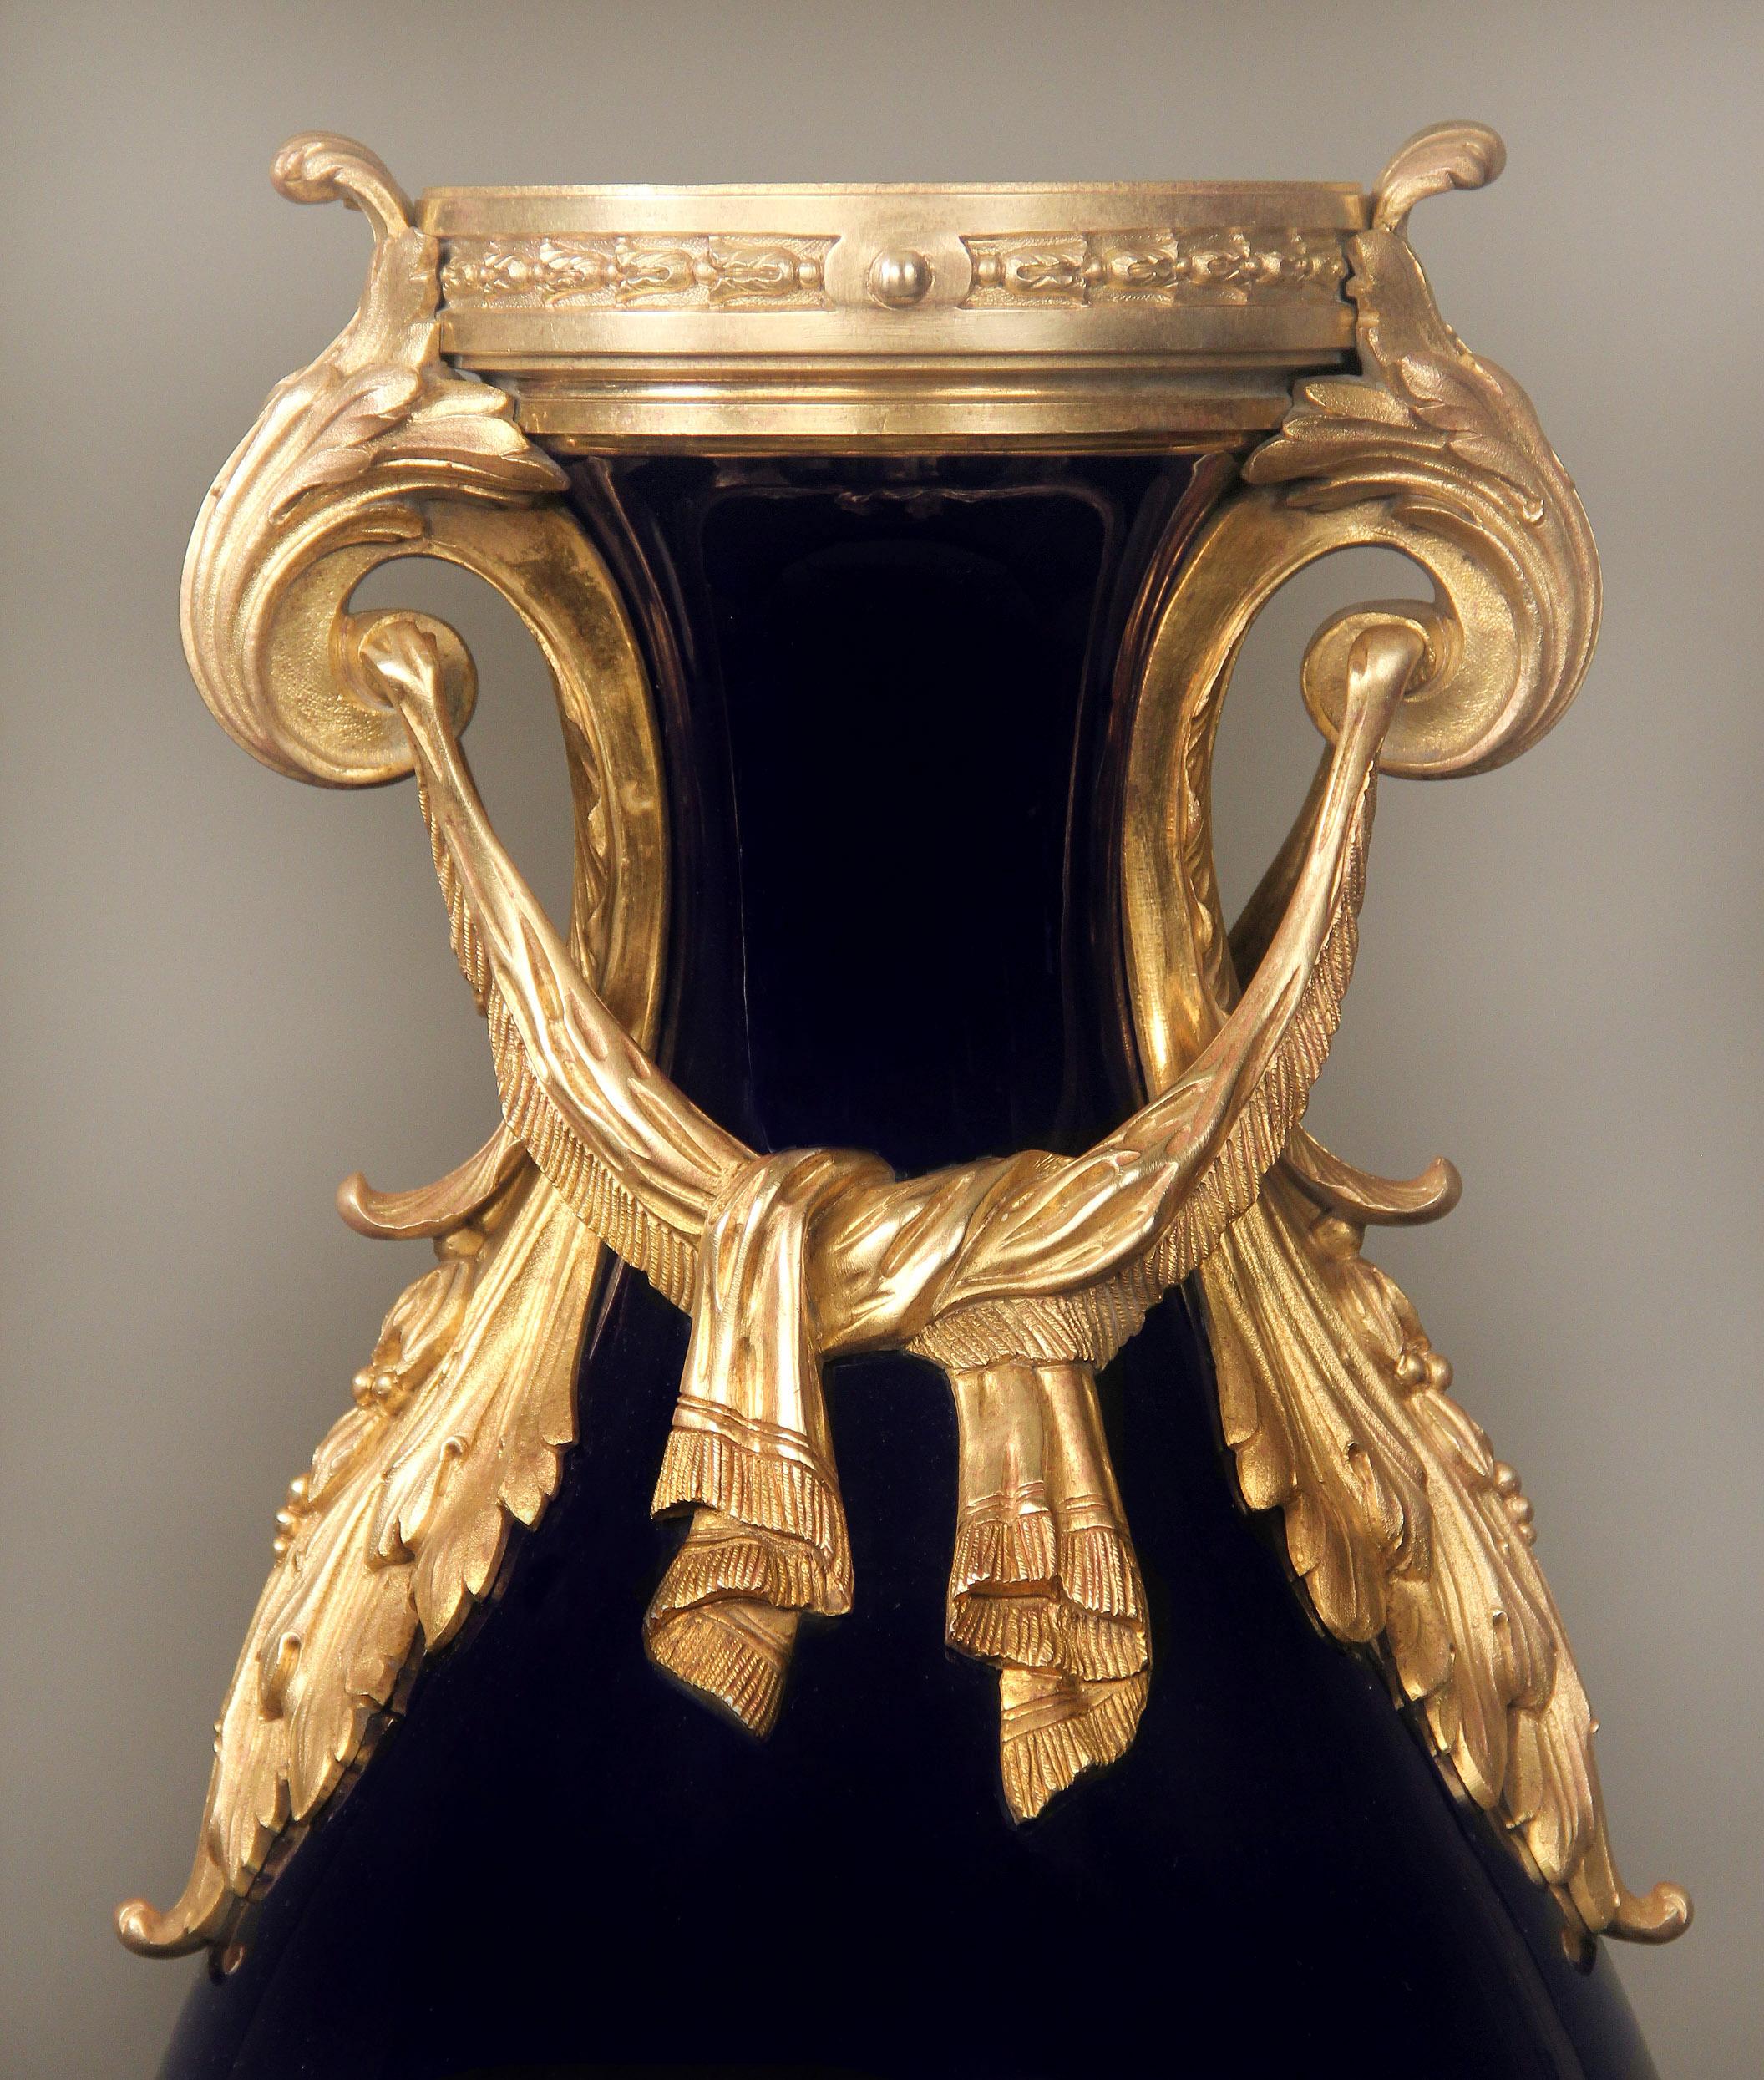 Late 19th century gilt bronze mounted Sèvres style porcelain vase.

The cobalt blue vase mounted with tied bronze drapes and handles. 

In late 1739-early 1740 the Sèvres Porcelain Factory opened in the Royal Château of Vincennes, Sixteen years